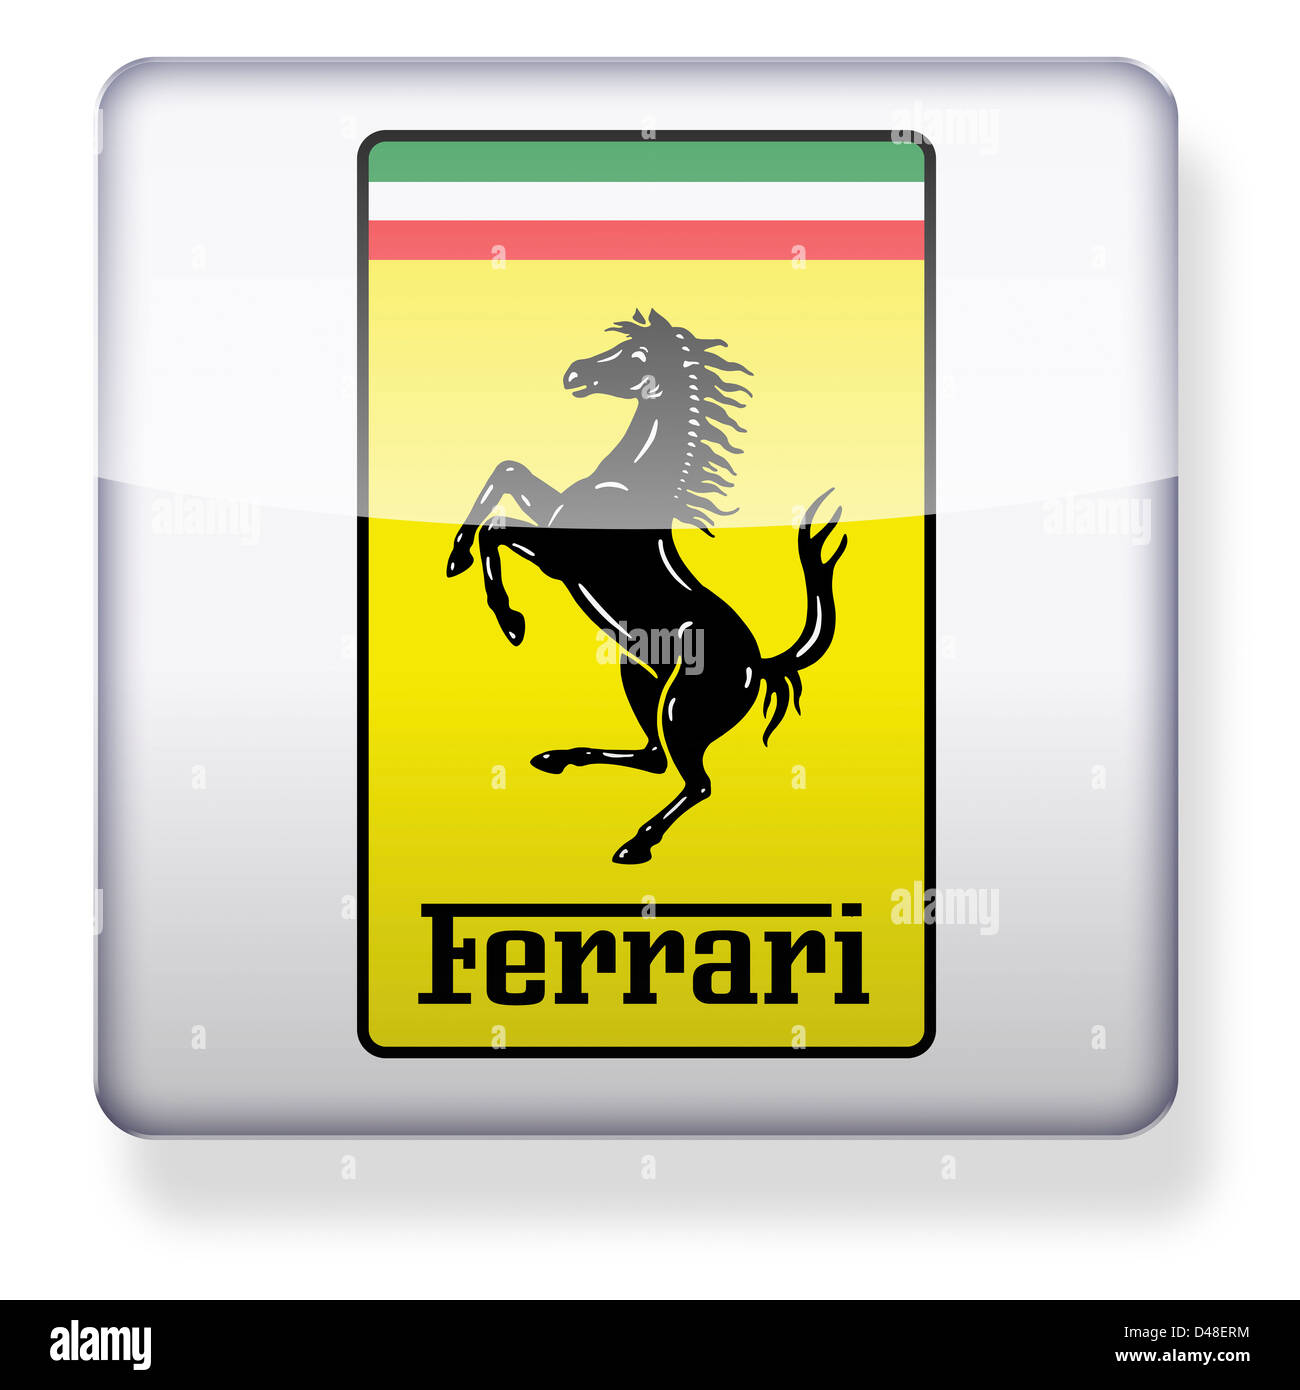 Ferrari logo Cut Out Stock Images & Pictures - Alamy